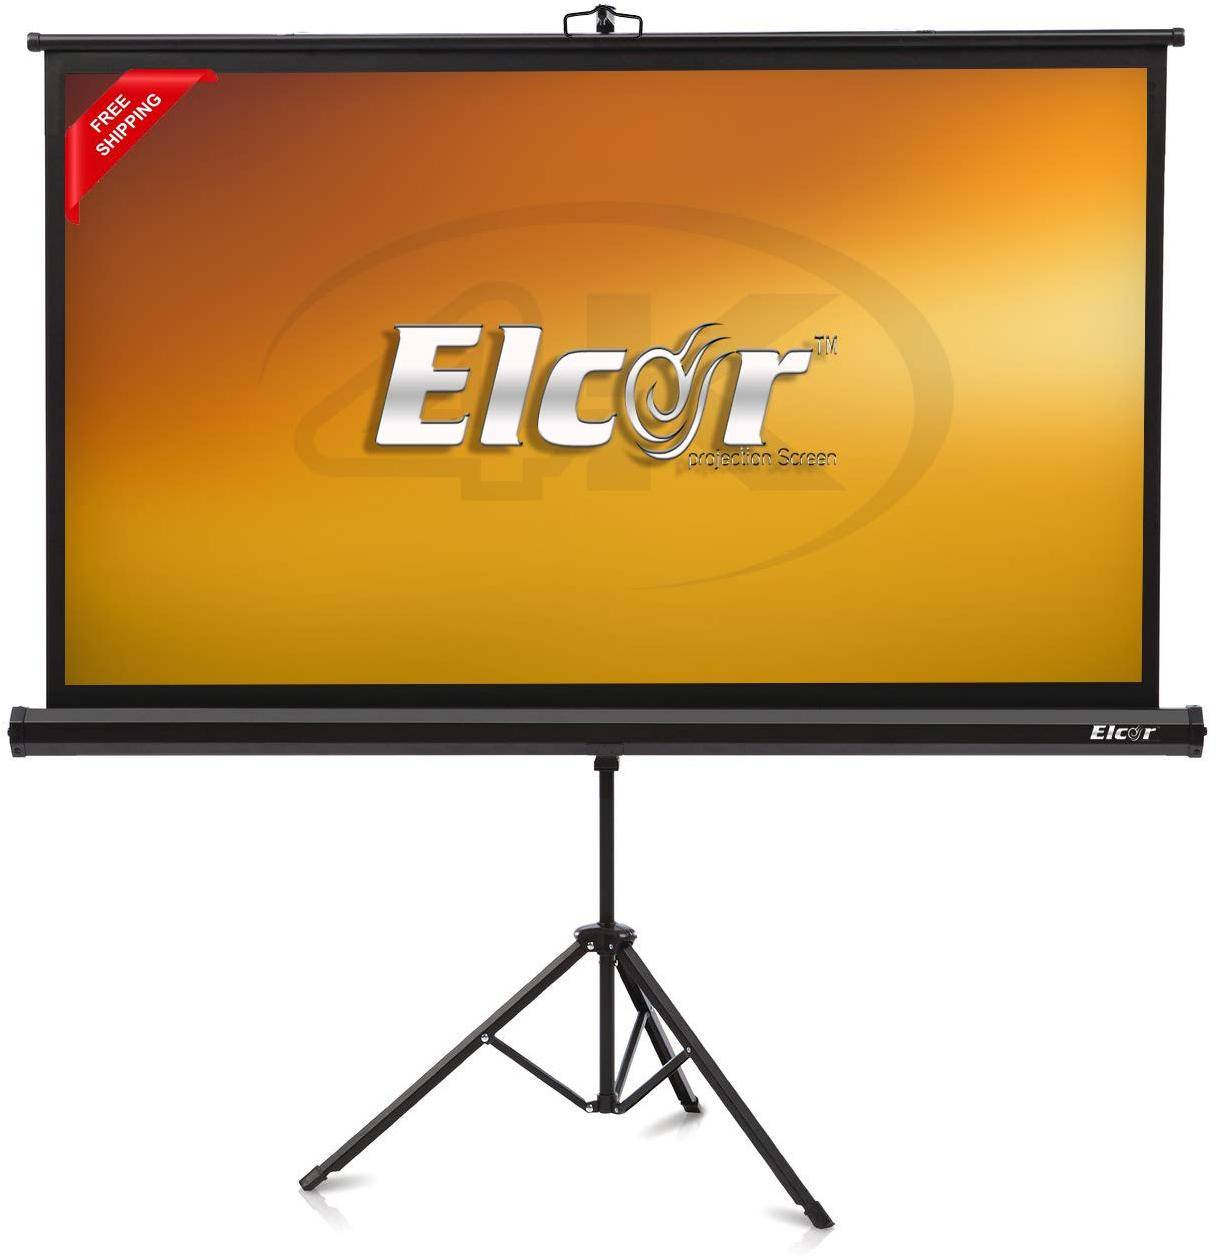 ELCOR 4ft X 7ft 106 inch Diagonal Tripod Projection Screen  zoom image